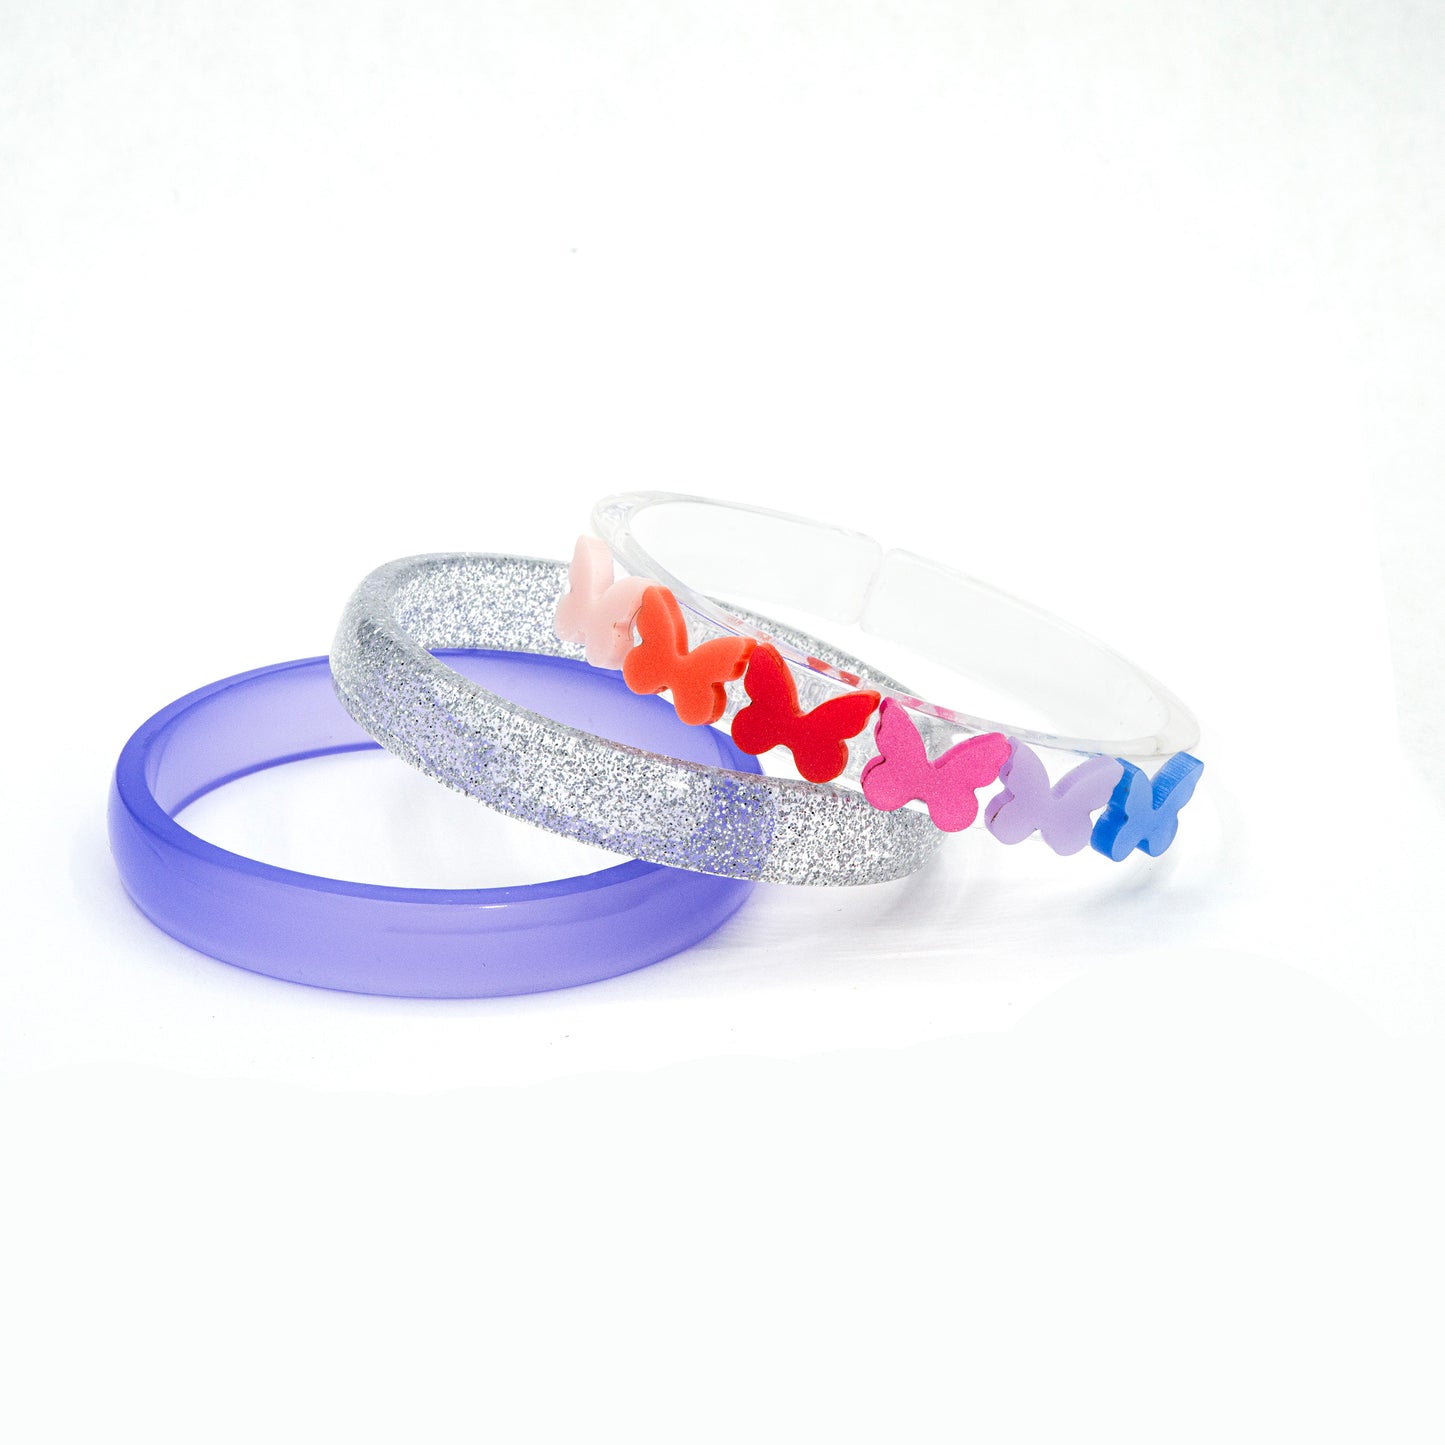 Set of three acrylic bracelets in different colors. One is silver glitter, one is purple and the third one is clear and adorned with six colorful butterflies. 